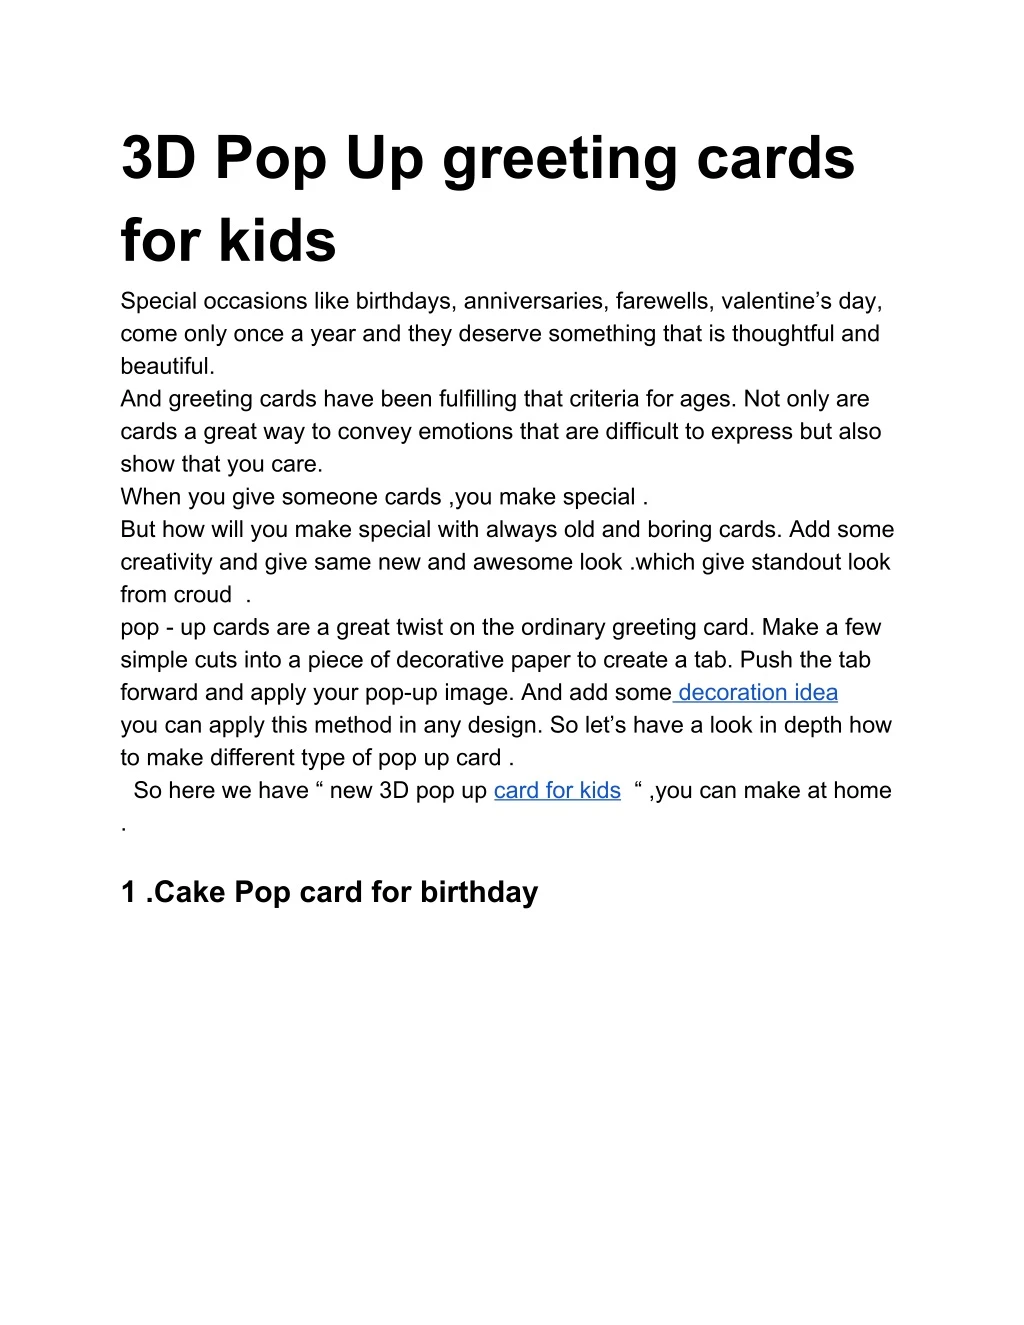 3d pop up greeting cards for kids